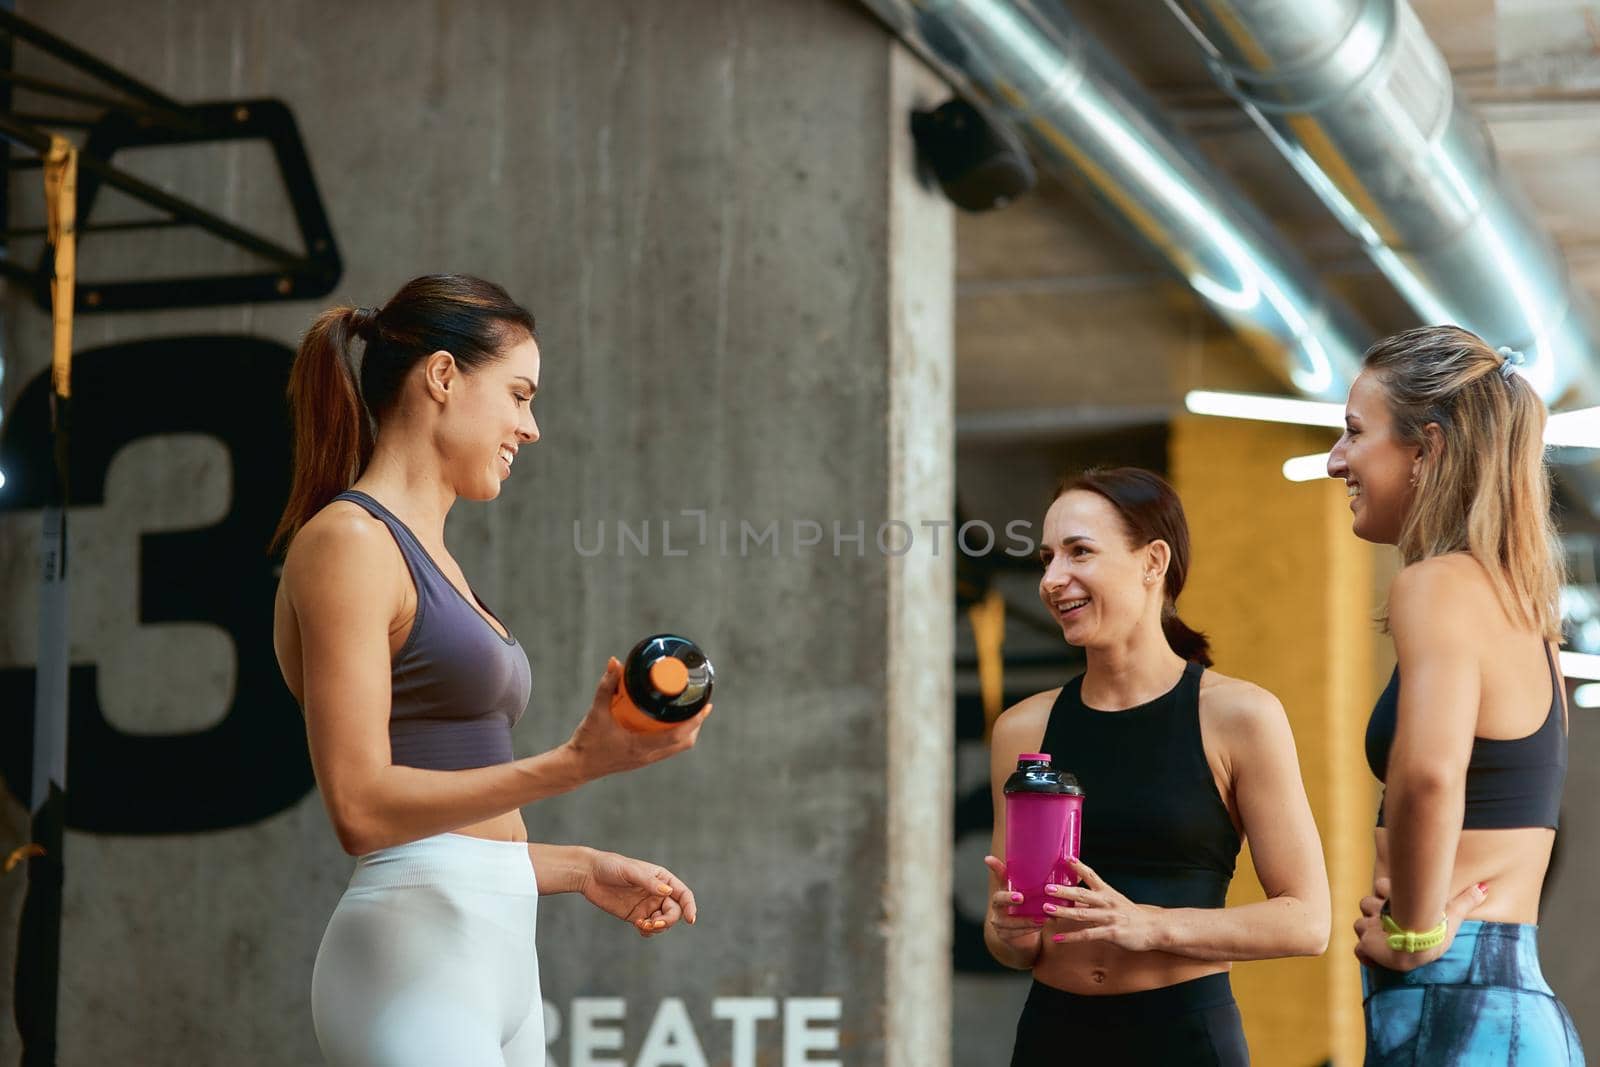 Resting after workout. Group of three young beautiful fitness women in sportswear talking and smiling while taking a break at gym. Sport, wellness and healthy lifestyle